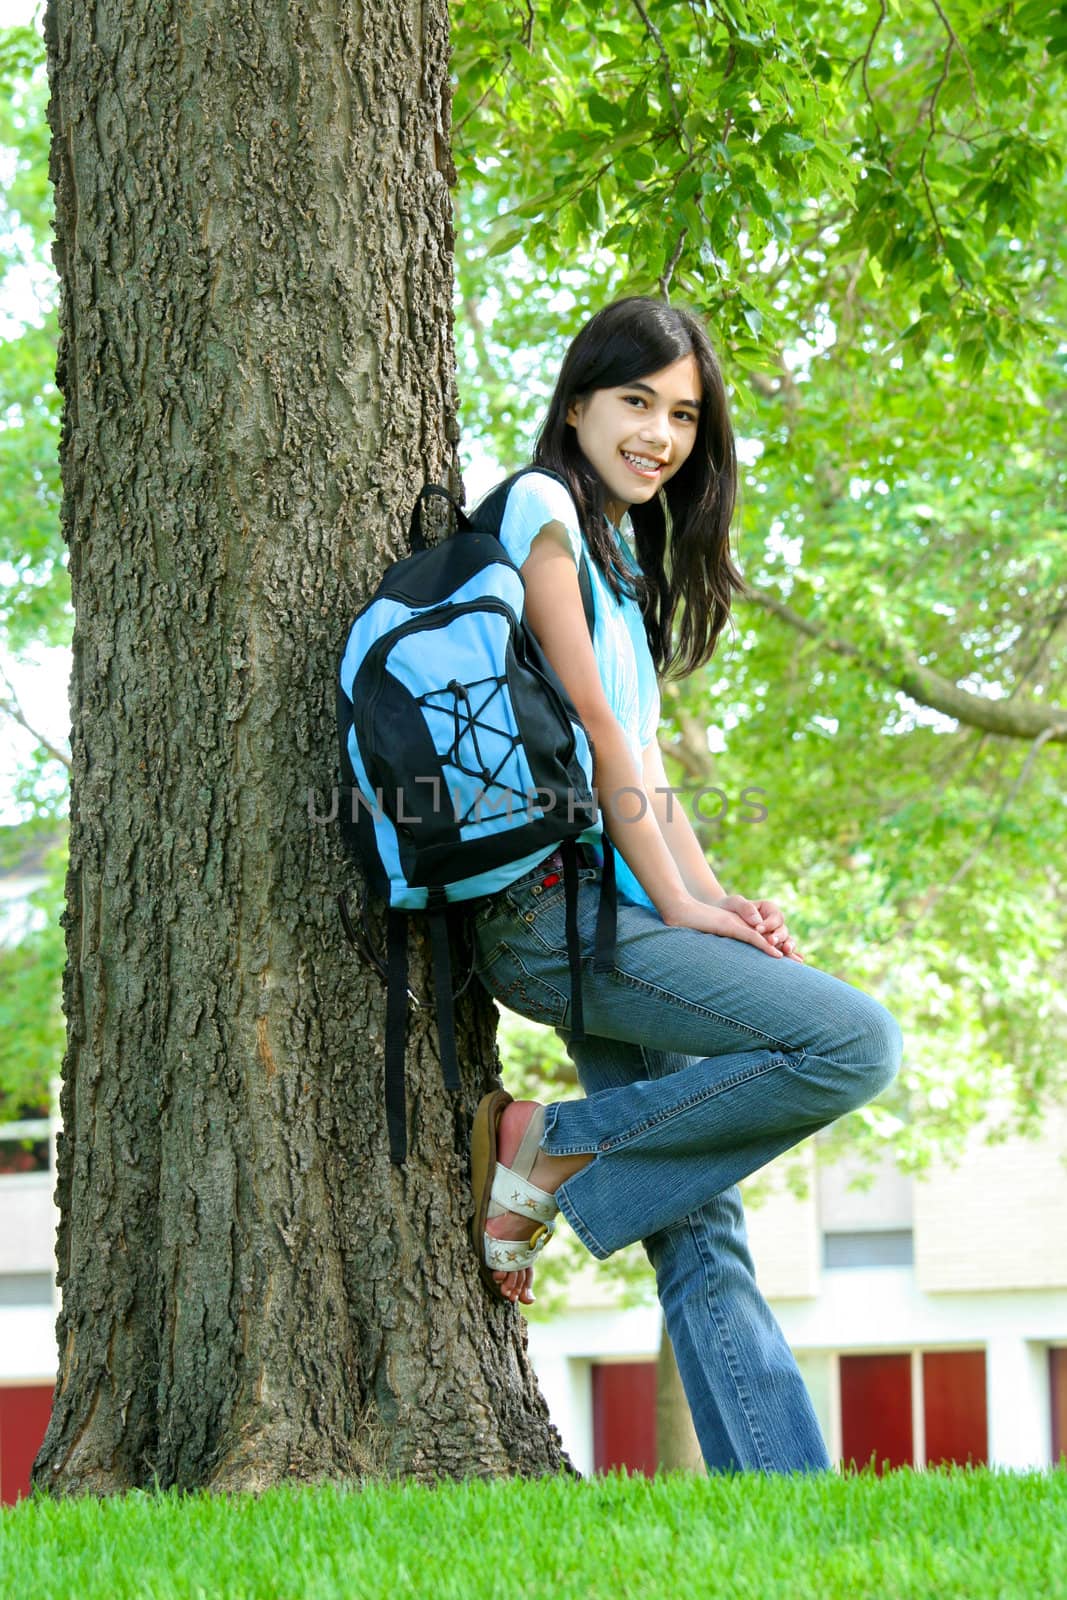 Young teen girl standing with backpack by tree, smiling. Part as by jarenwicklund